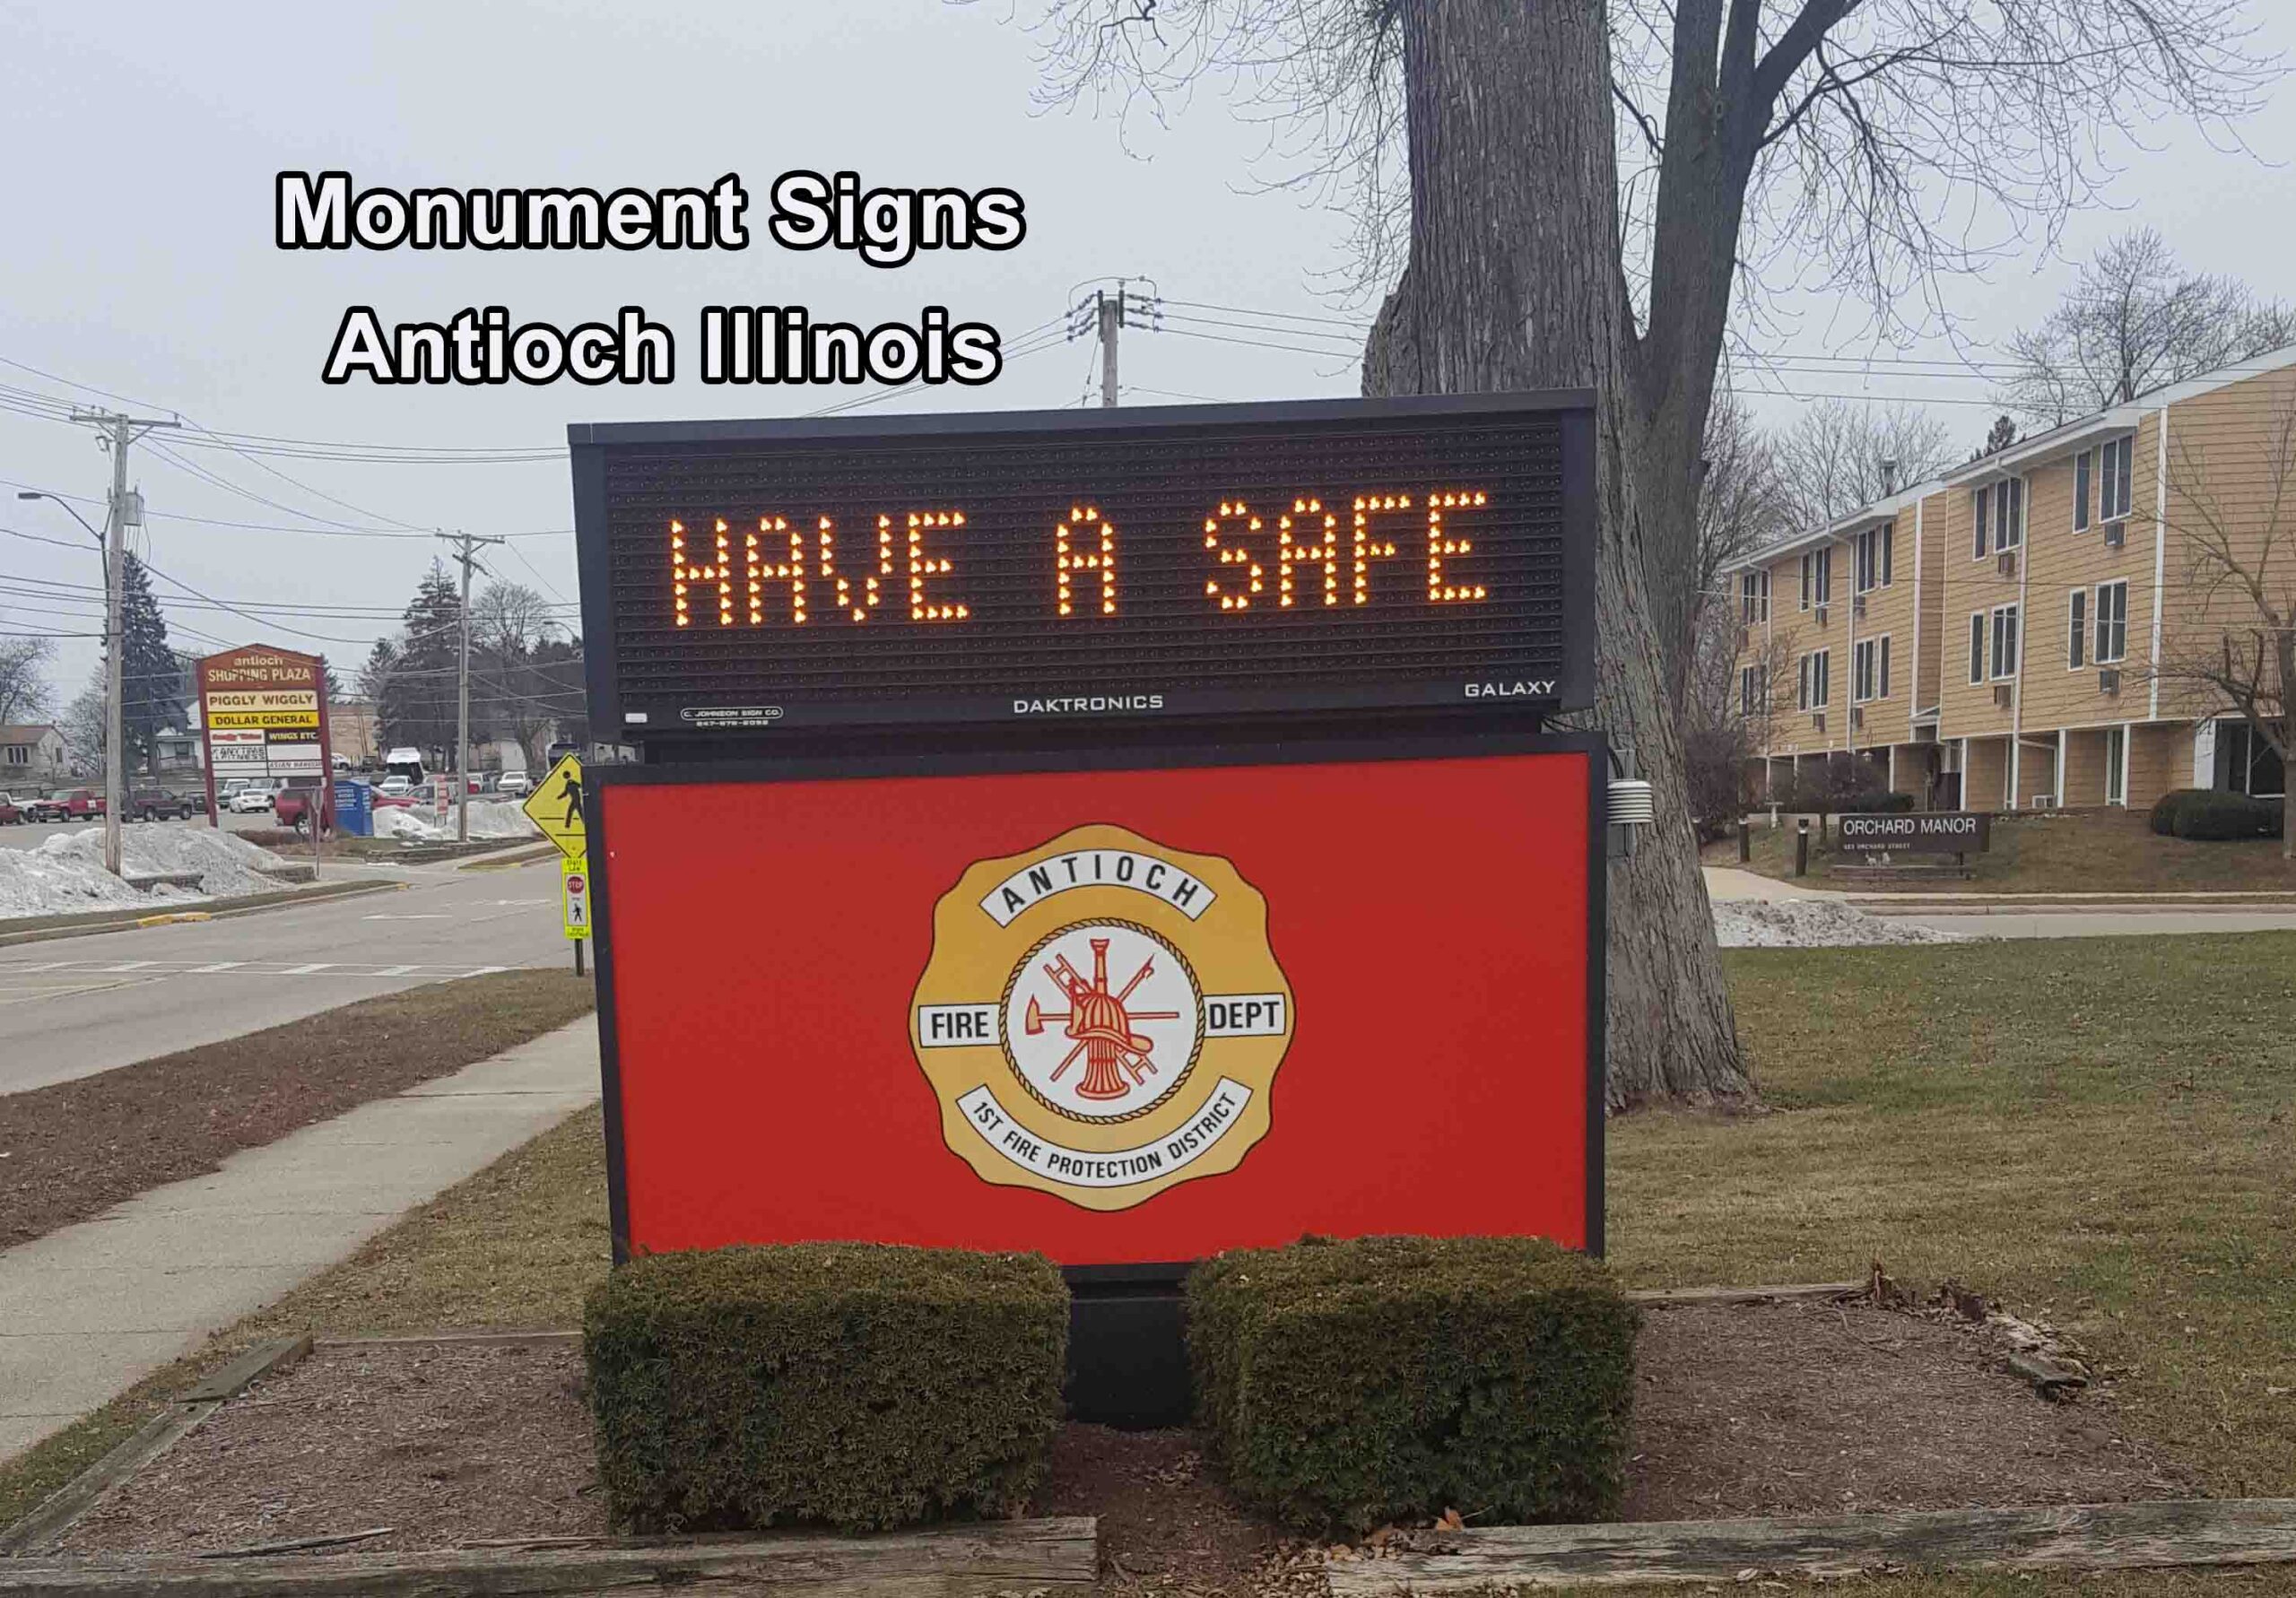 Monument Signs in Antioch Illinois - Reader Board